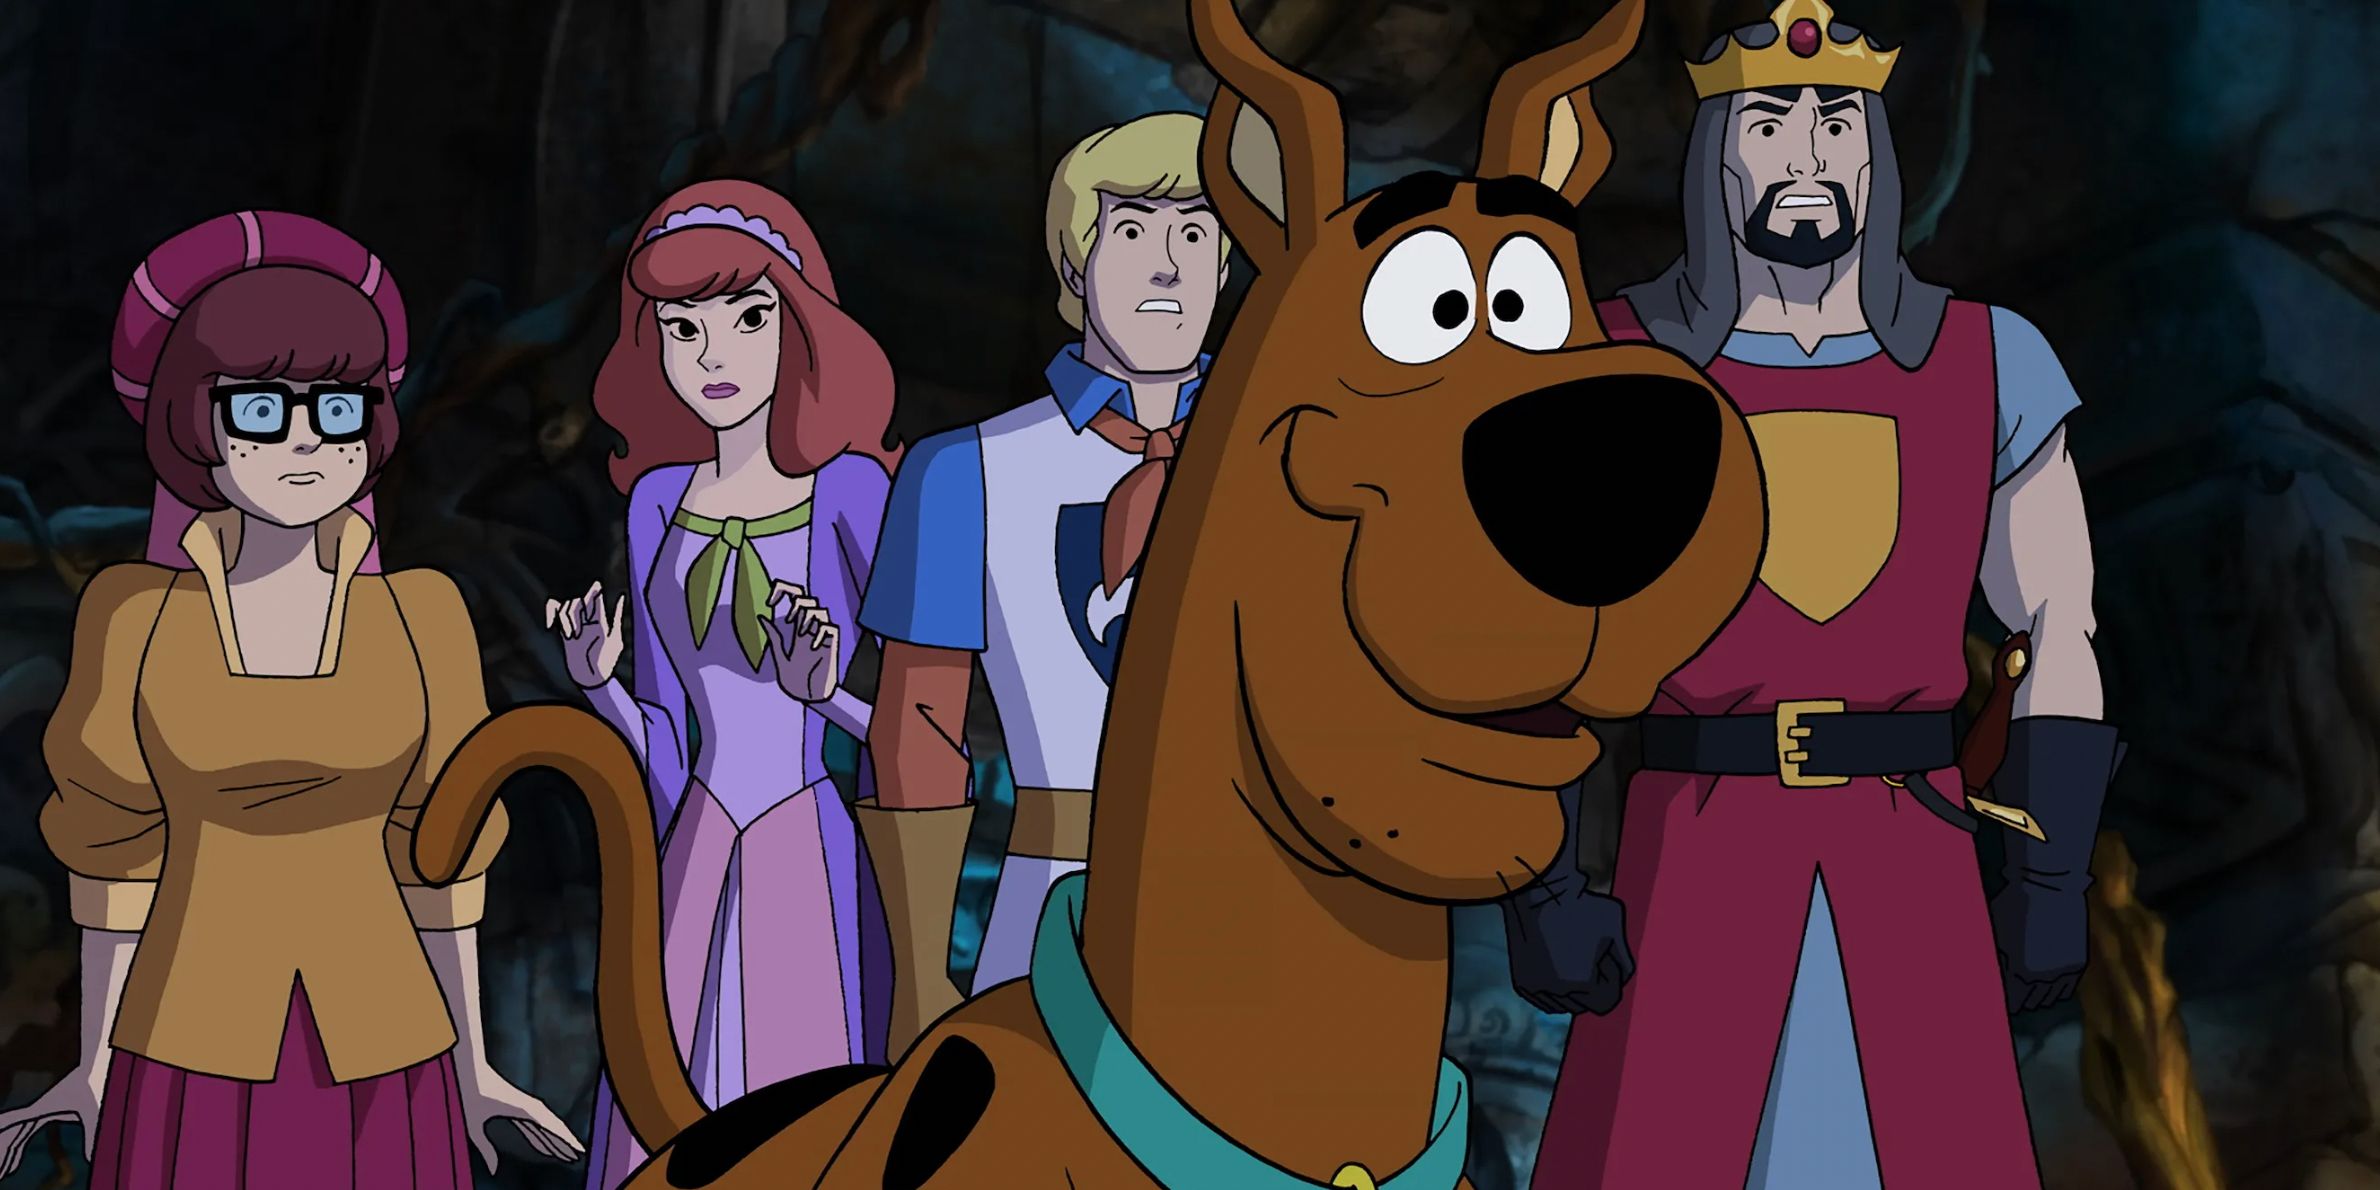 Members of the Scooby gang in Arthurian clothes in The Sword and the Scoob